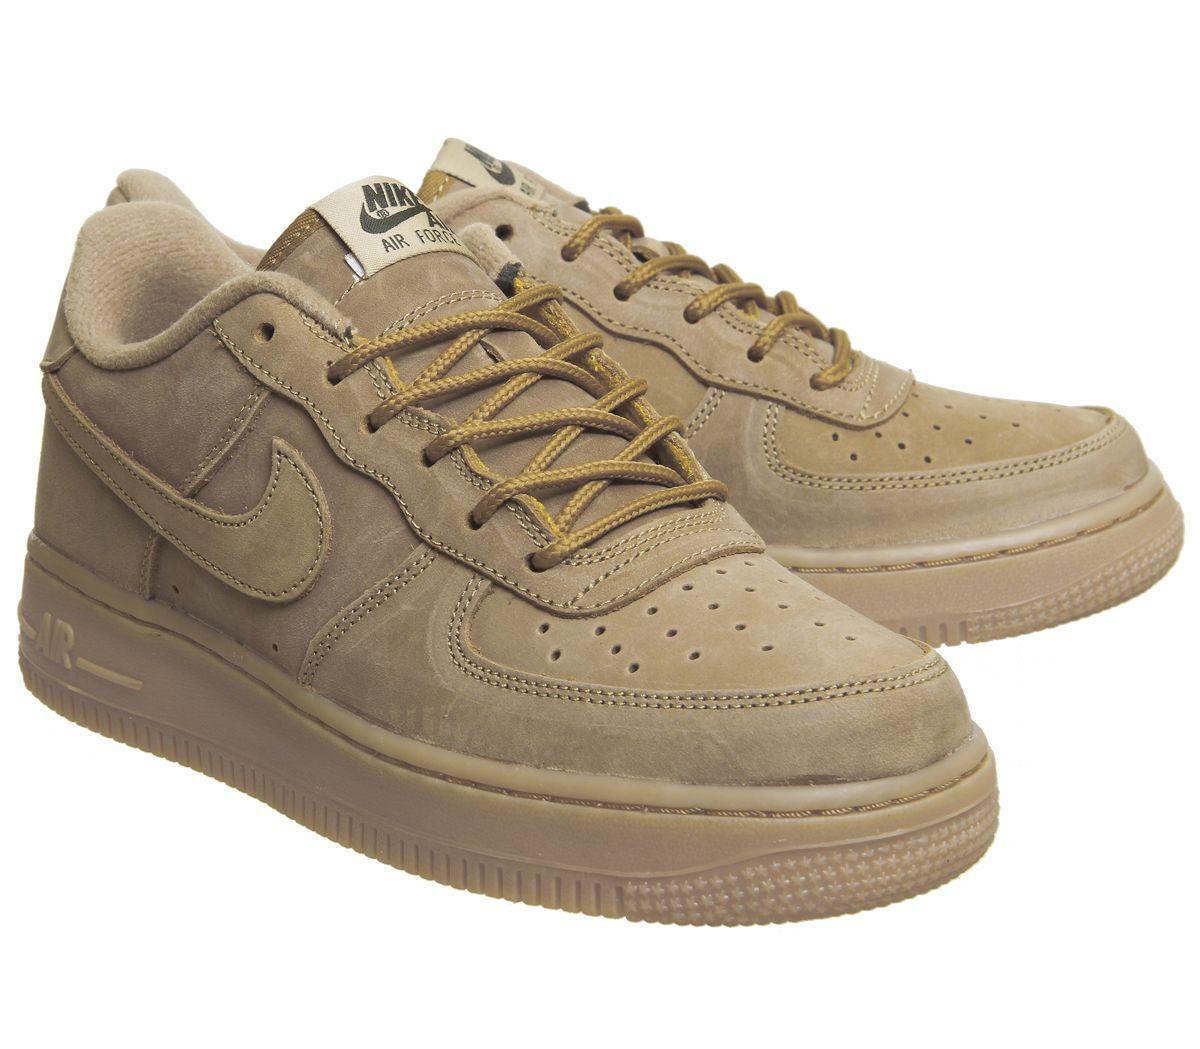 Nike Suede Air Force 1 Trainers in Brown - Lyst